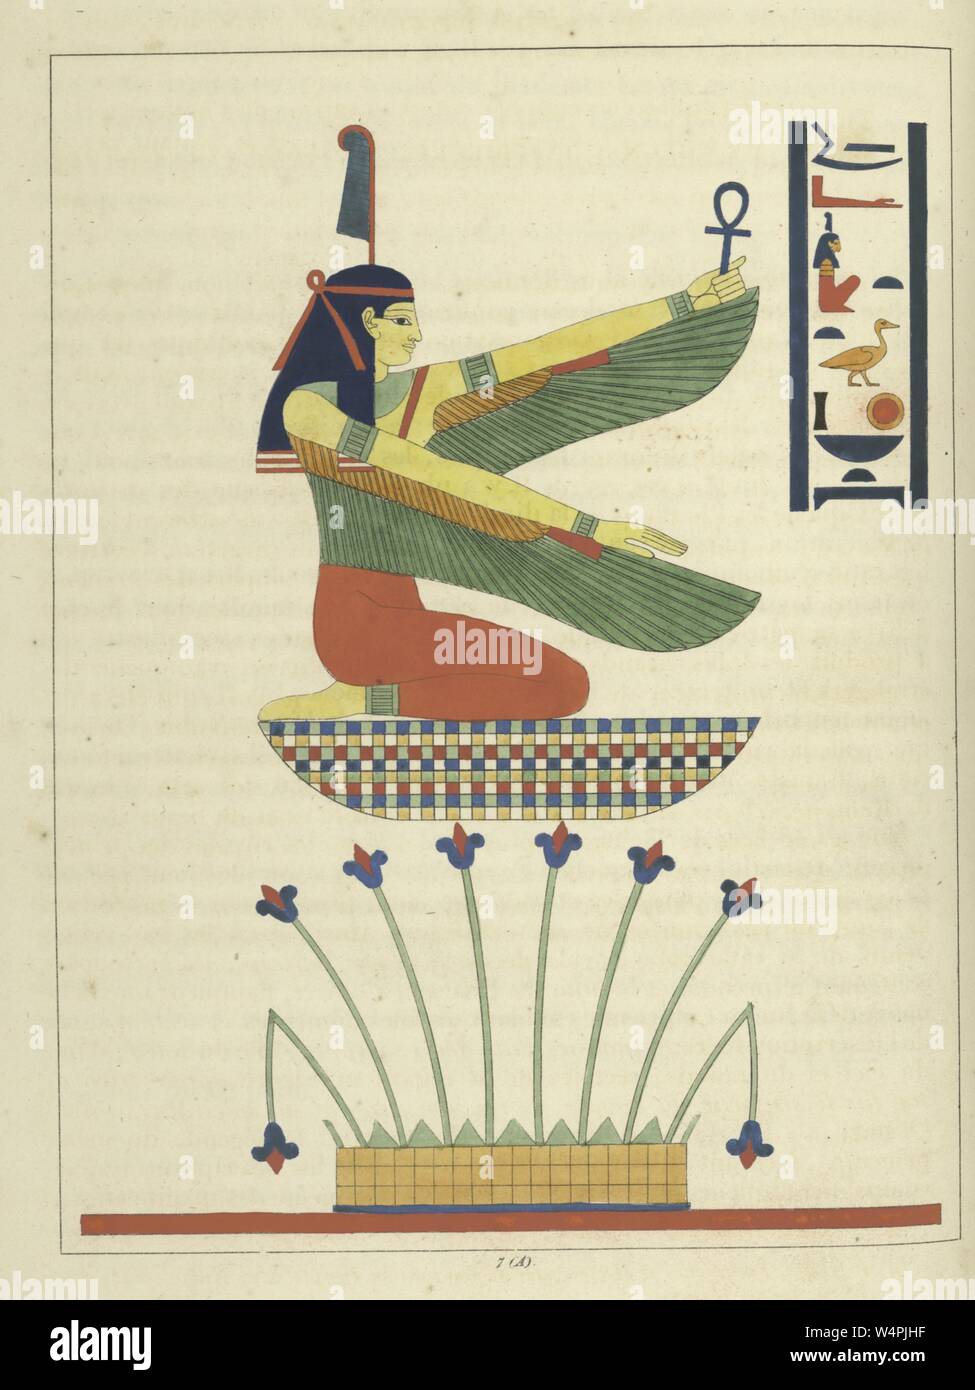 Ancient Egyptian goddess Maat, ancient Egyptian concepts of truth, balance, order, harmony, law, morality, and justice, illustration from the book 'Pantheon Egyptien' by Leon Jean Joseph Dubois, 1824. From the New York Public Library. () Stock Photo